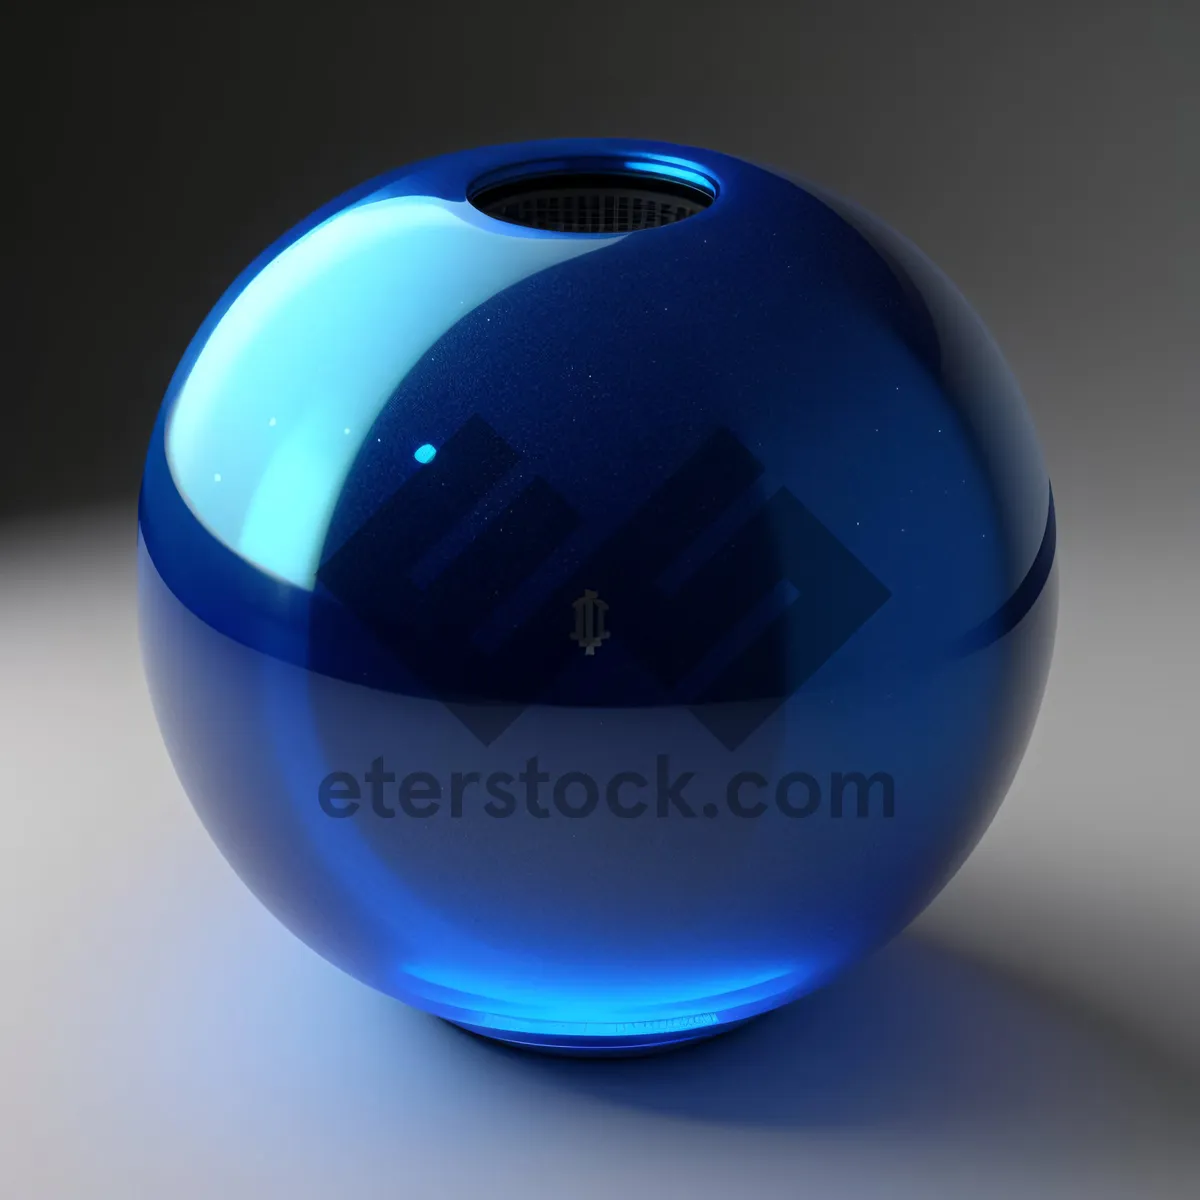 Picture of Spherical Glass Ball Relief - 3D Graphic Design